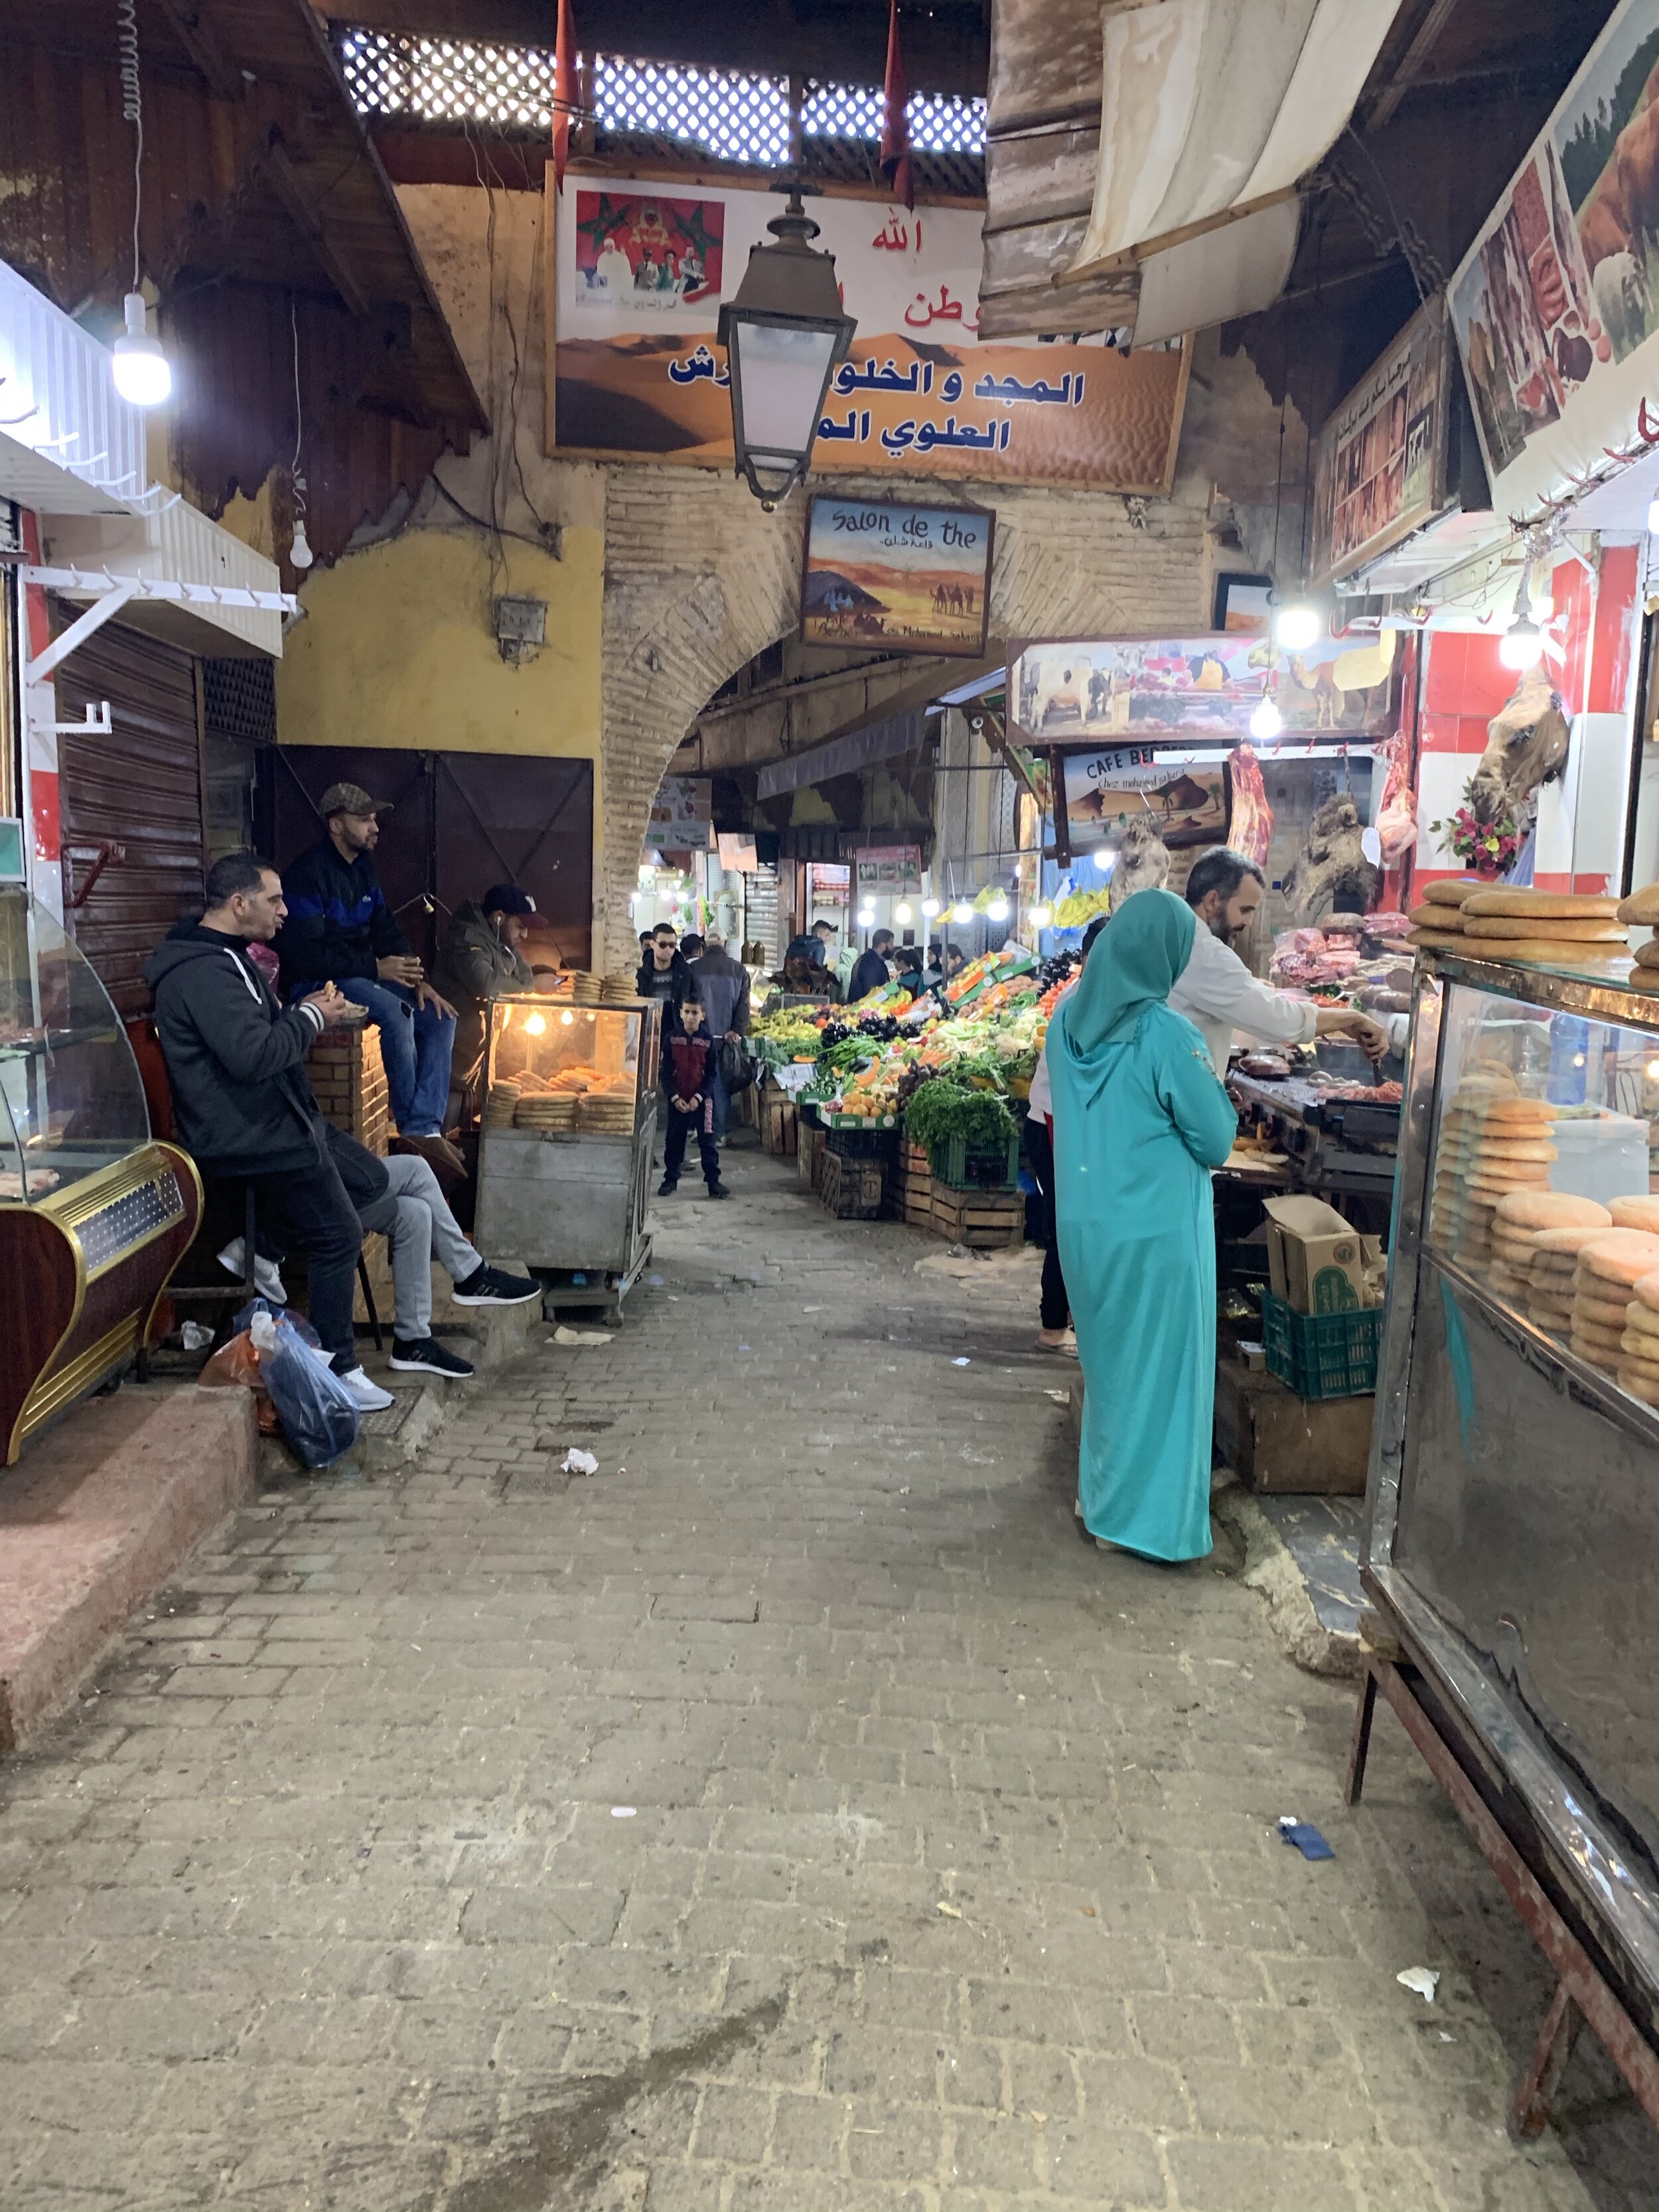 A sneaky shot of a butcher where you can see the camel heads near the lights if you look closely.